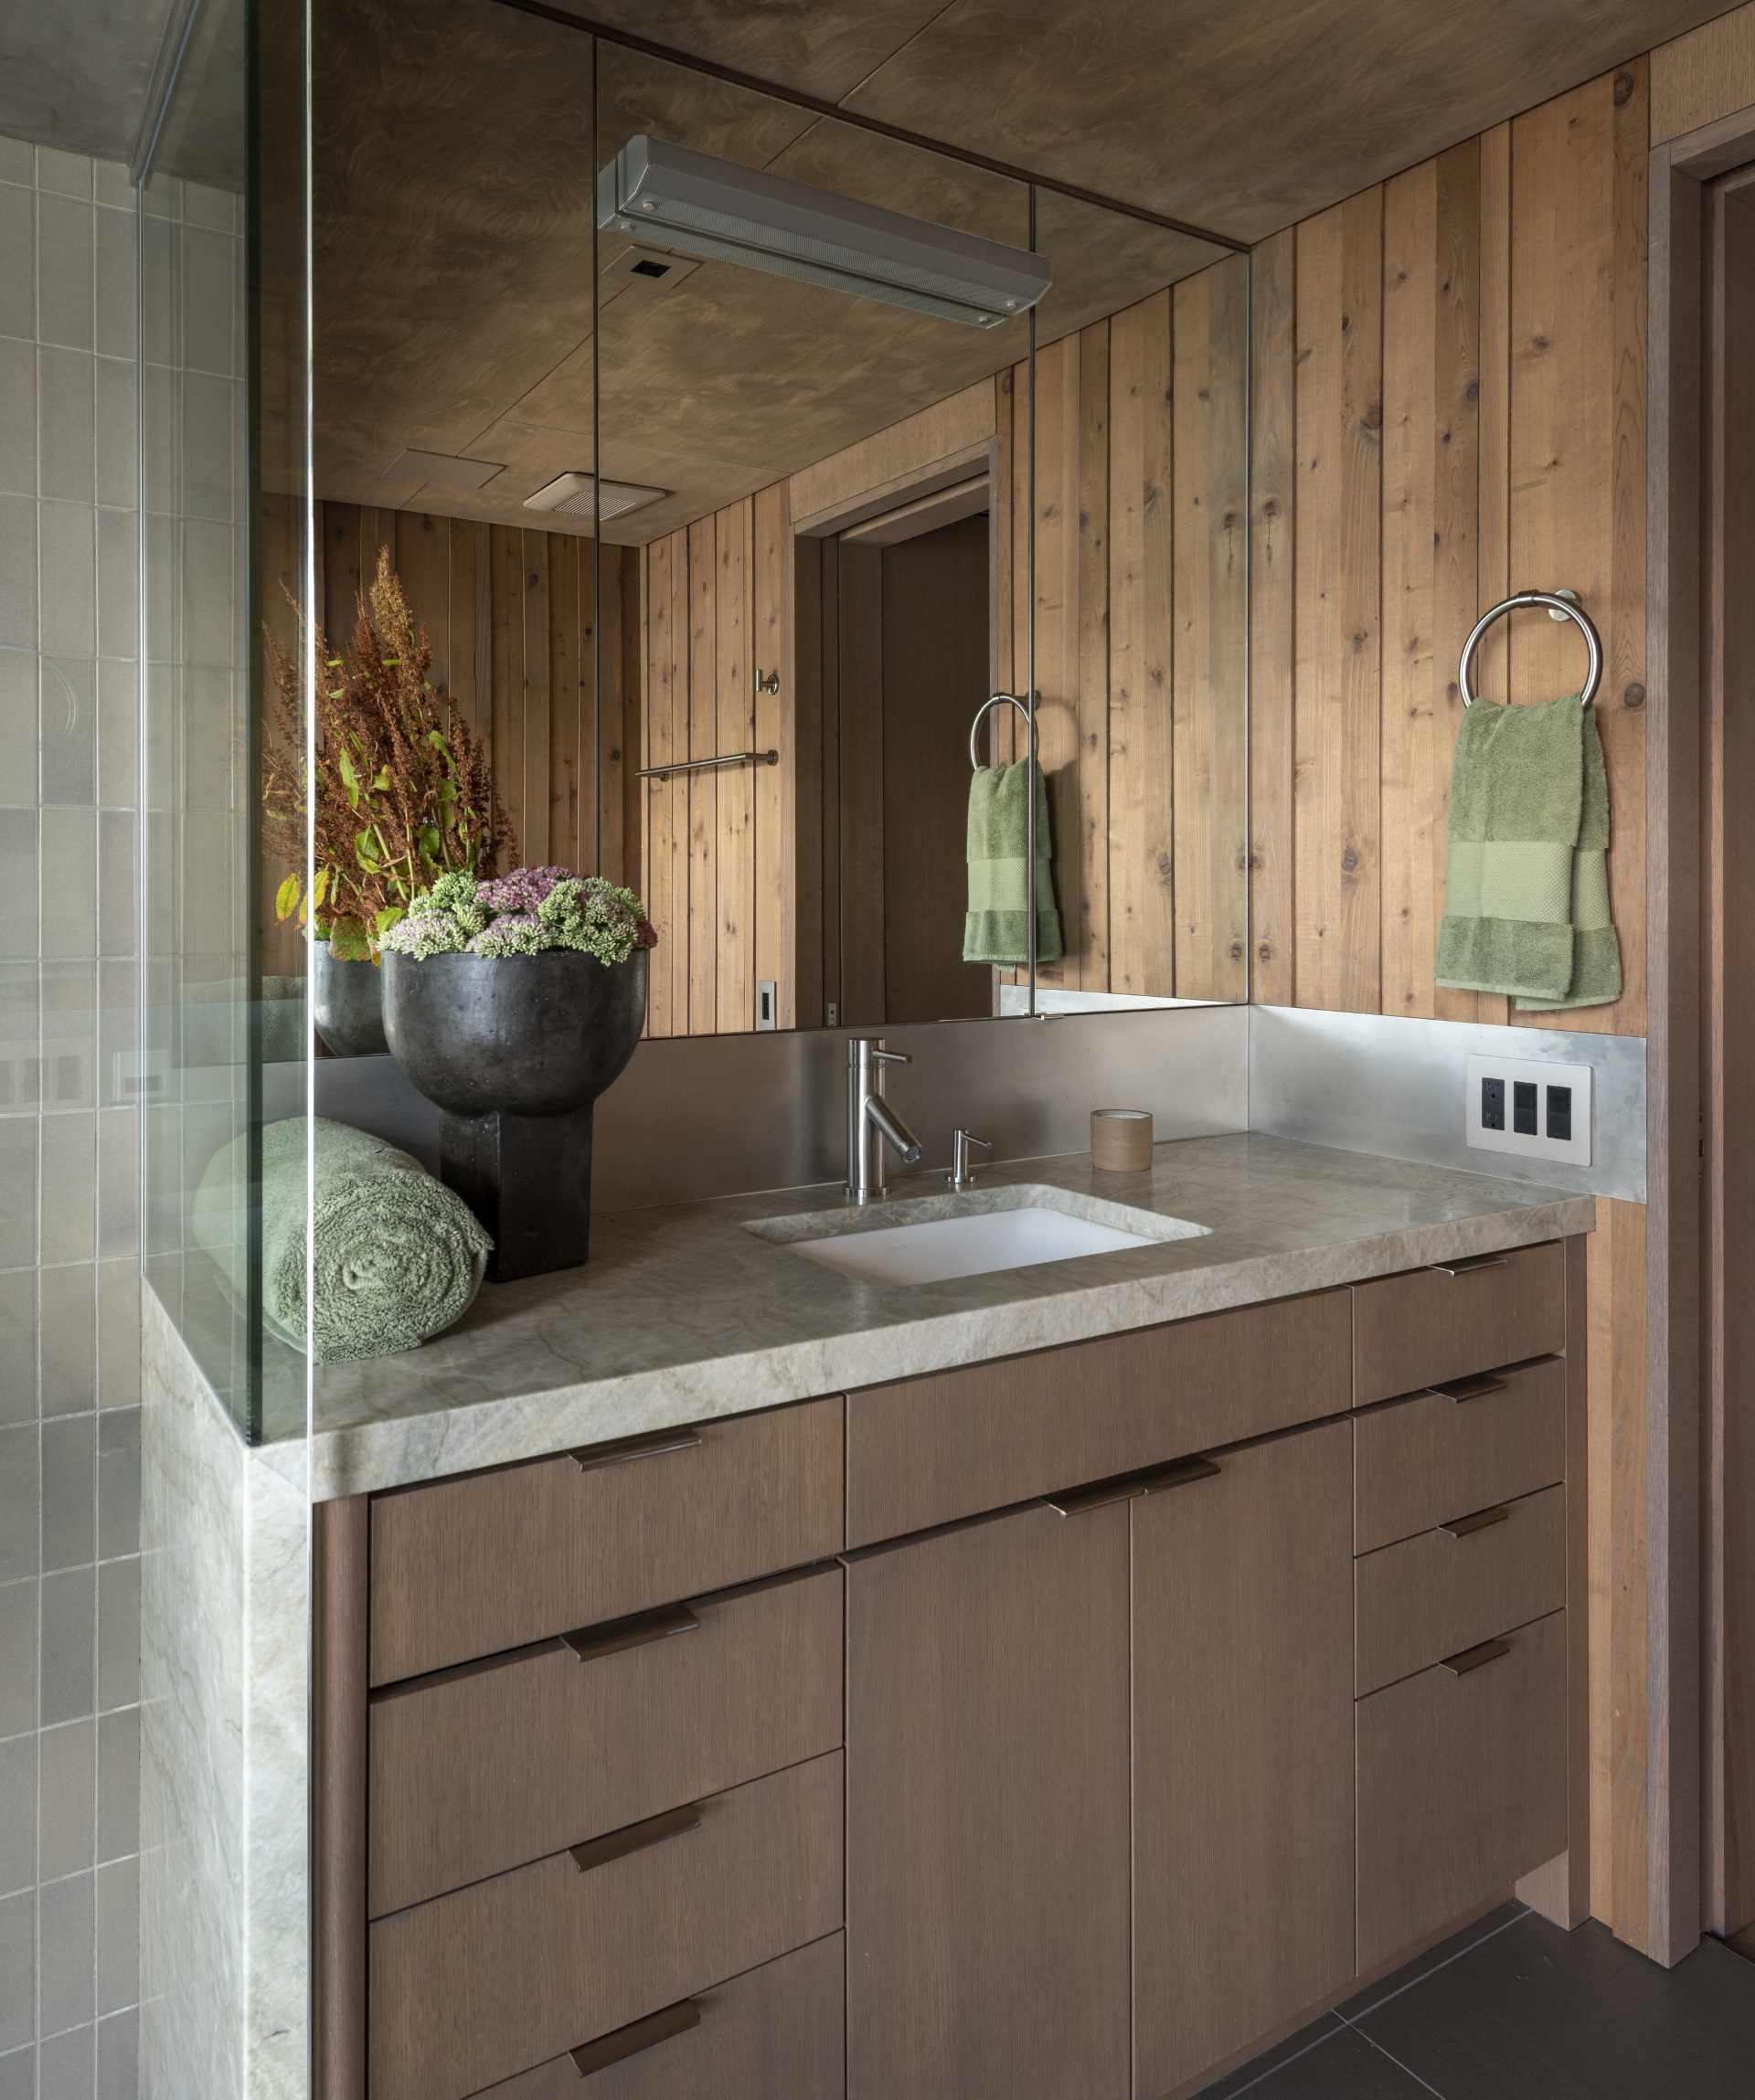 This primary bathroom features wood walls, while the dual shower has water views and tiled walls.